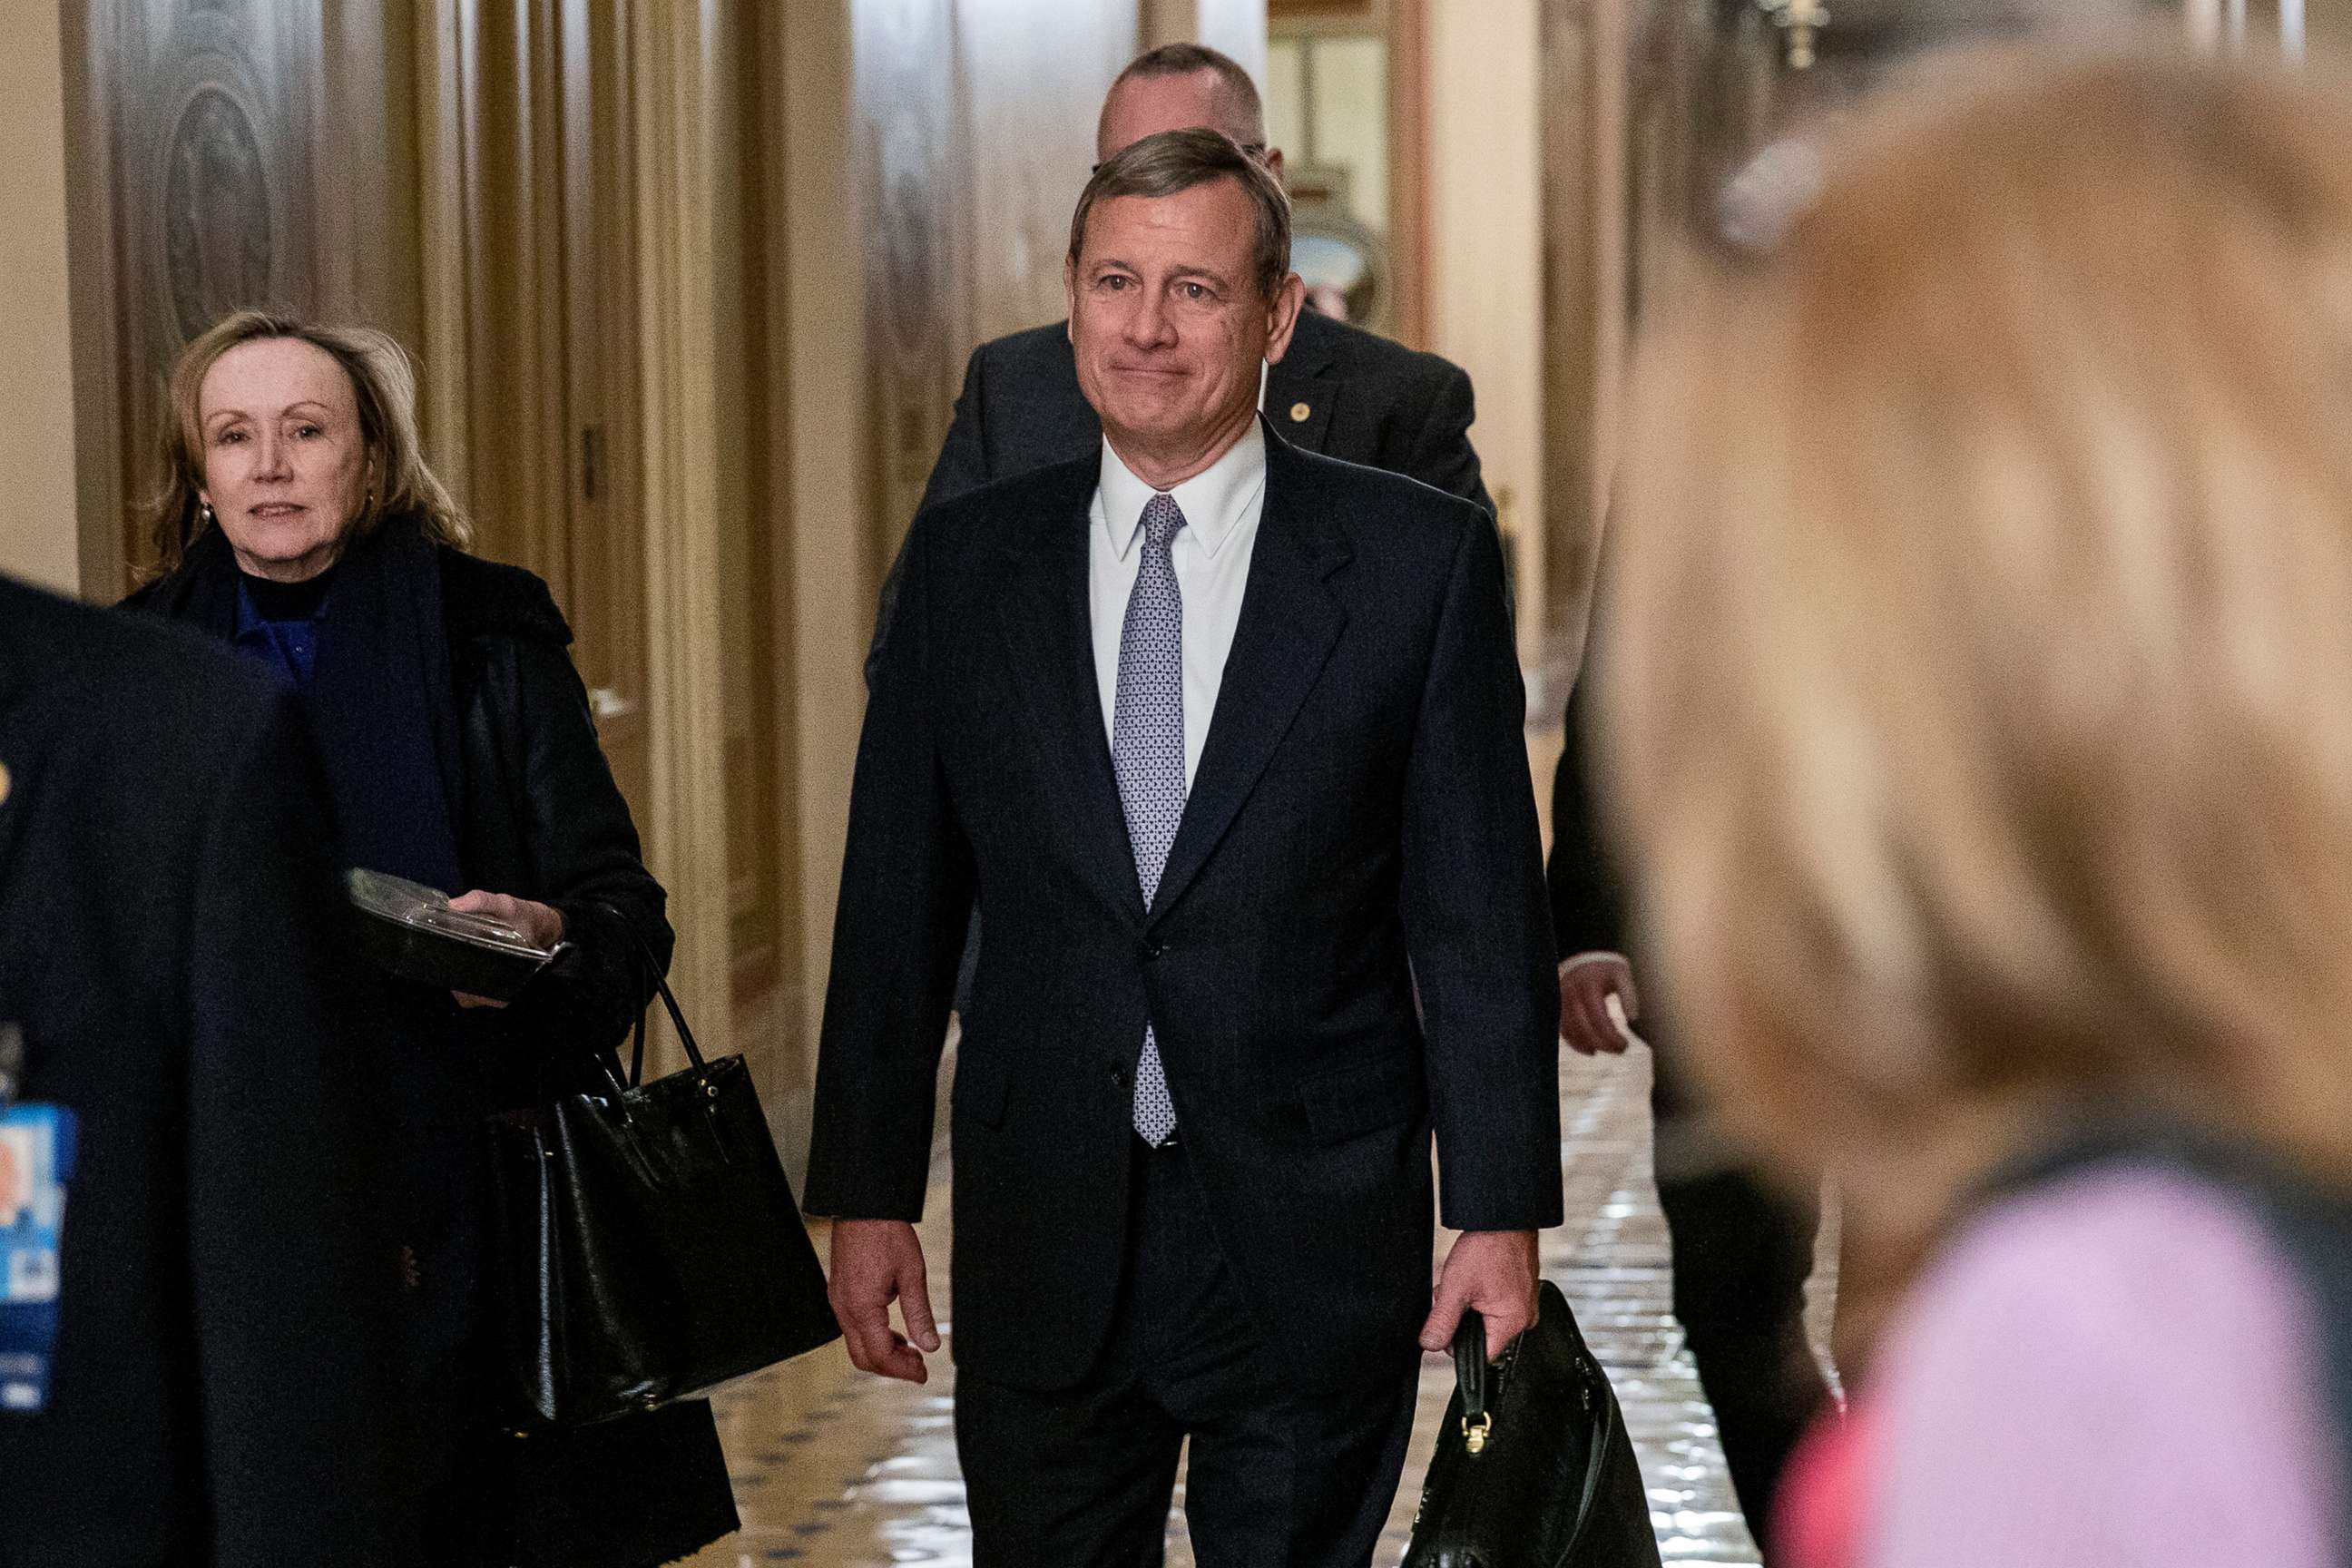 PHOTO: Supreme Court Chief Justice John Roberts leaves the Capitol building after the Senate impeachment trial of President Donald Trump was adjourned for the day, Jan. 27, 2020. 